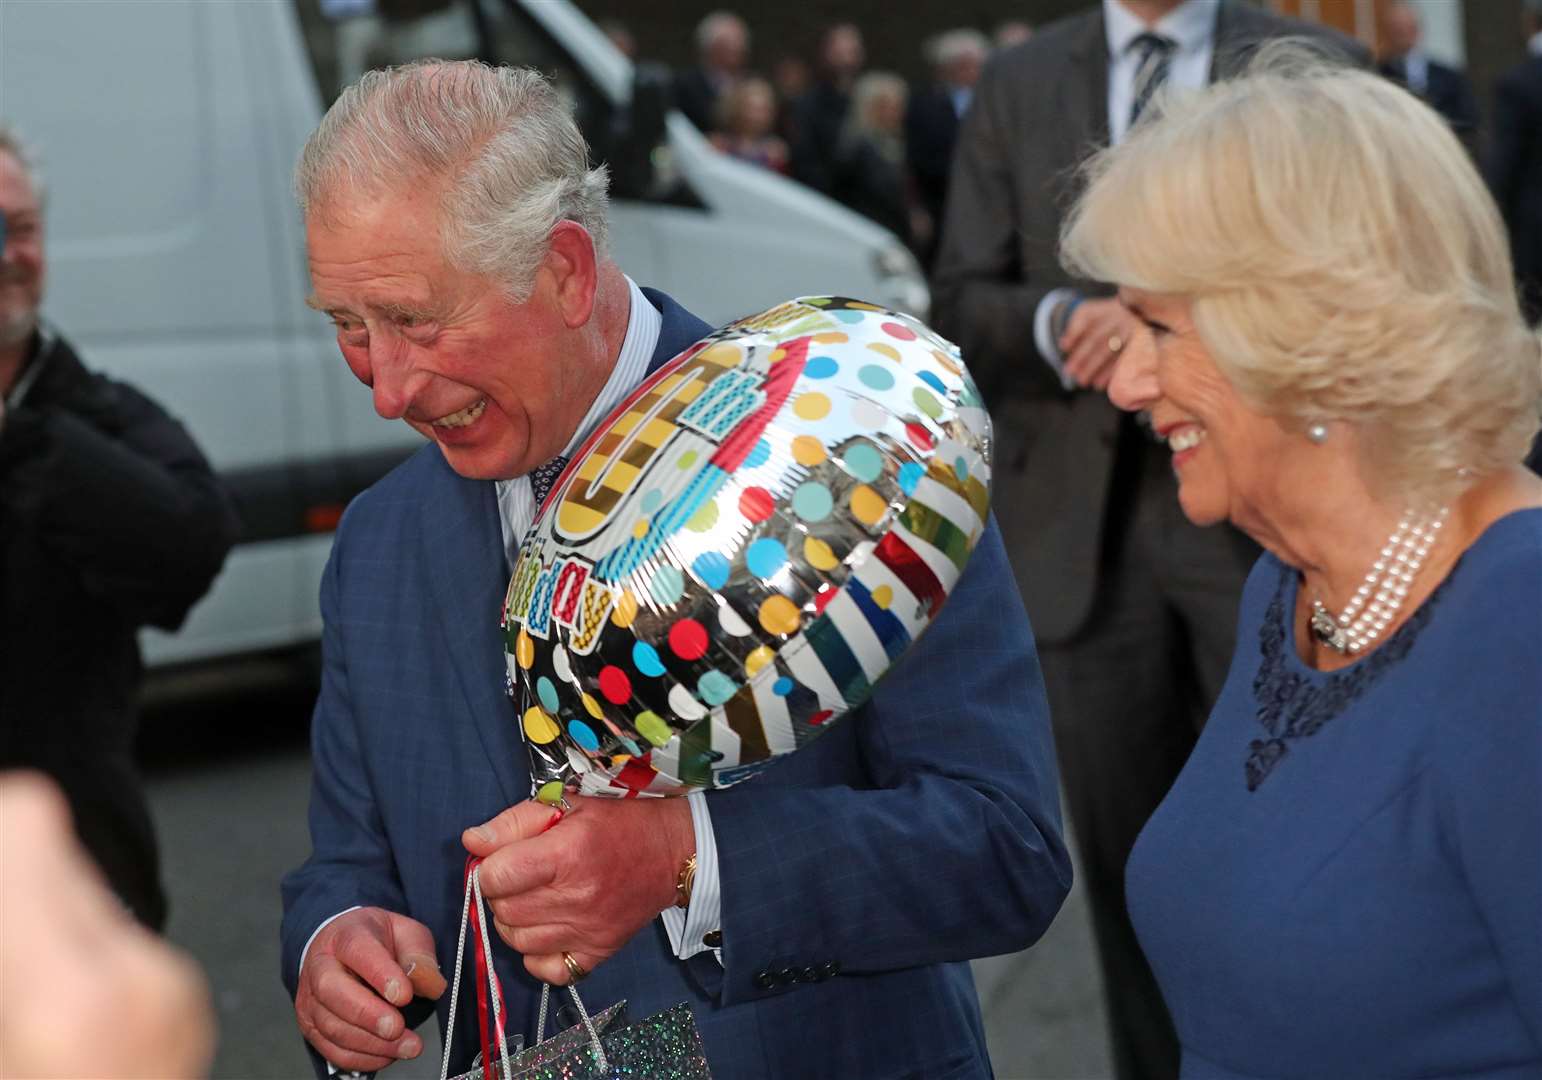 The Prince of Wales on his 70th birthday (Steve Parsons/PA)